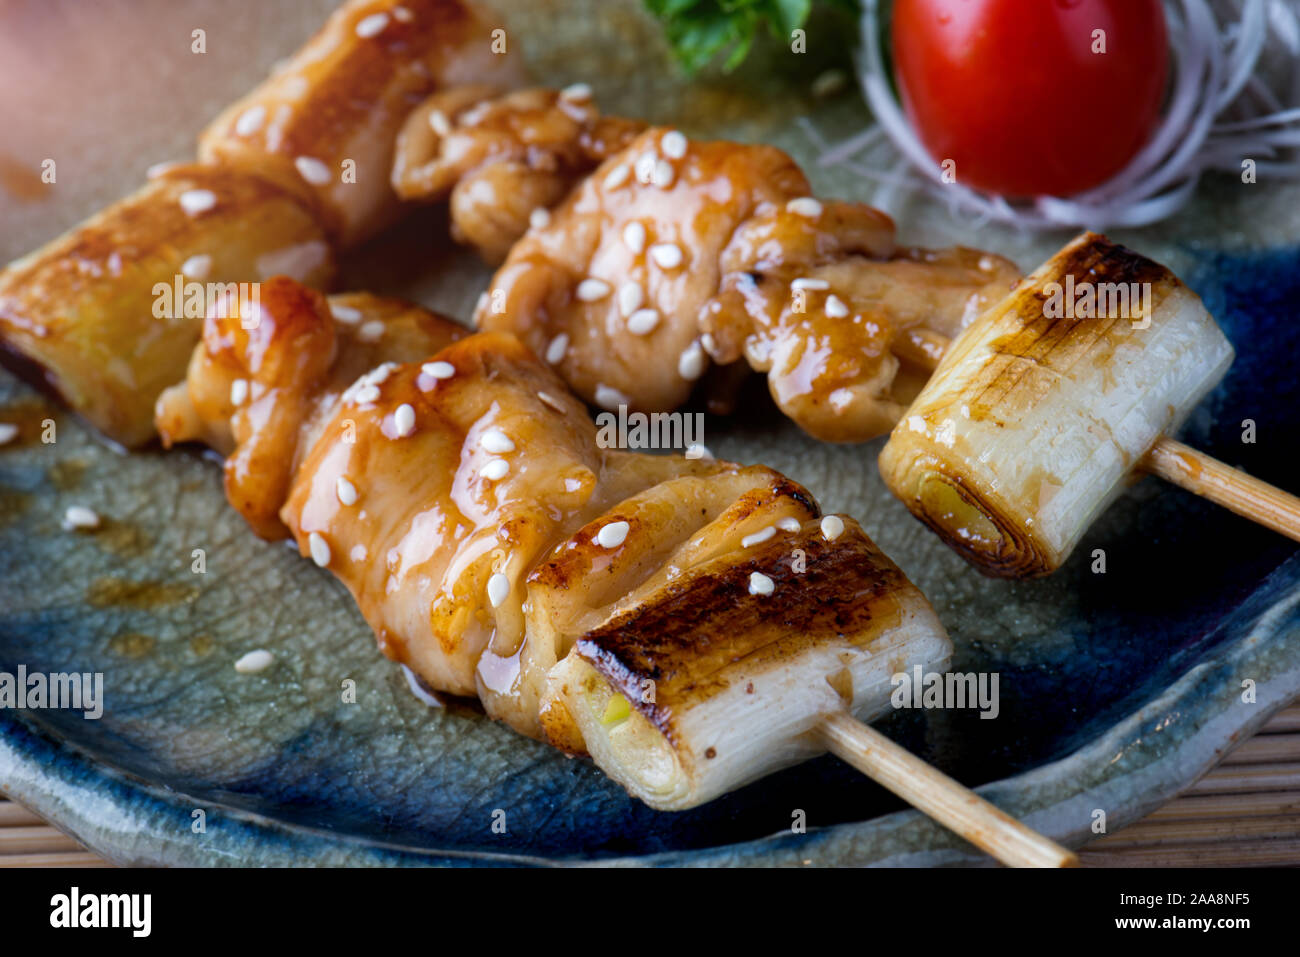 Japanese grilled chicken with teriyaki sauce serve in Japanese food style. Stock Photo